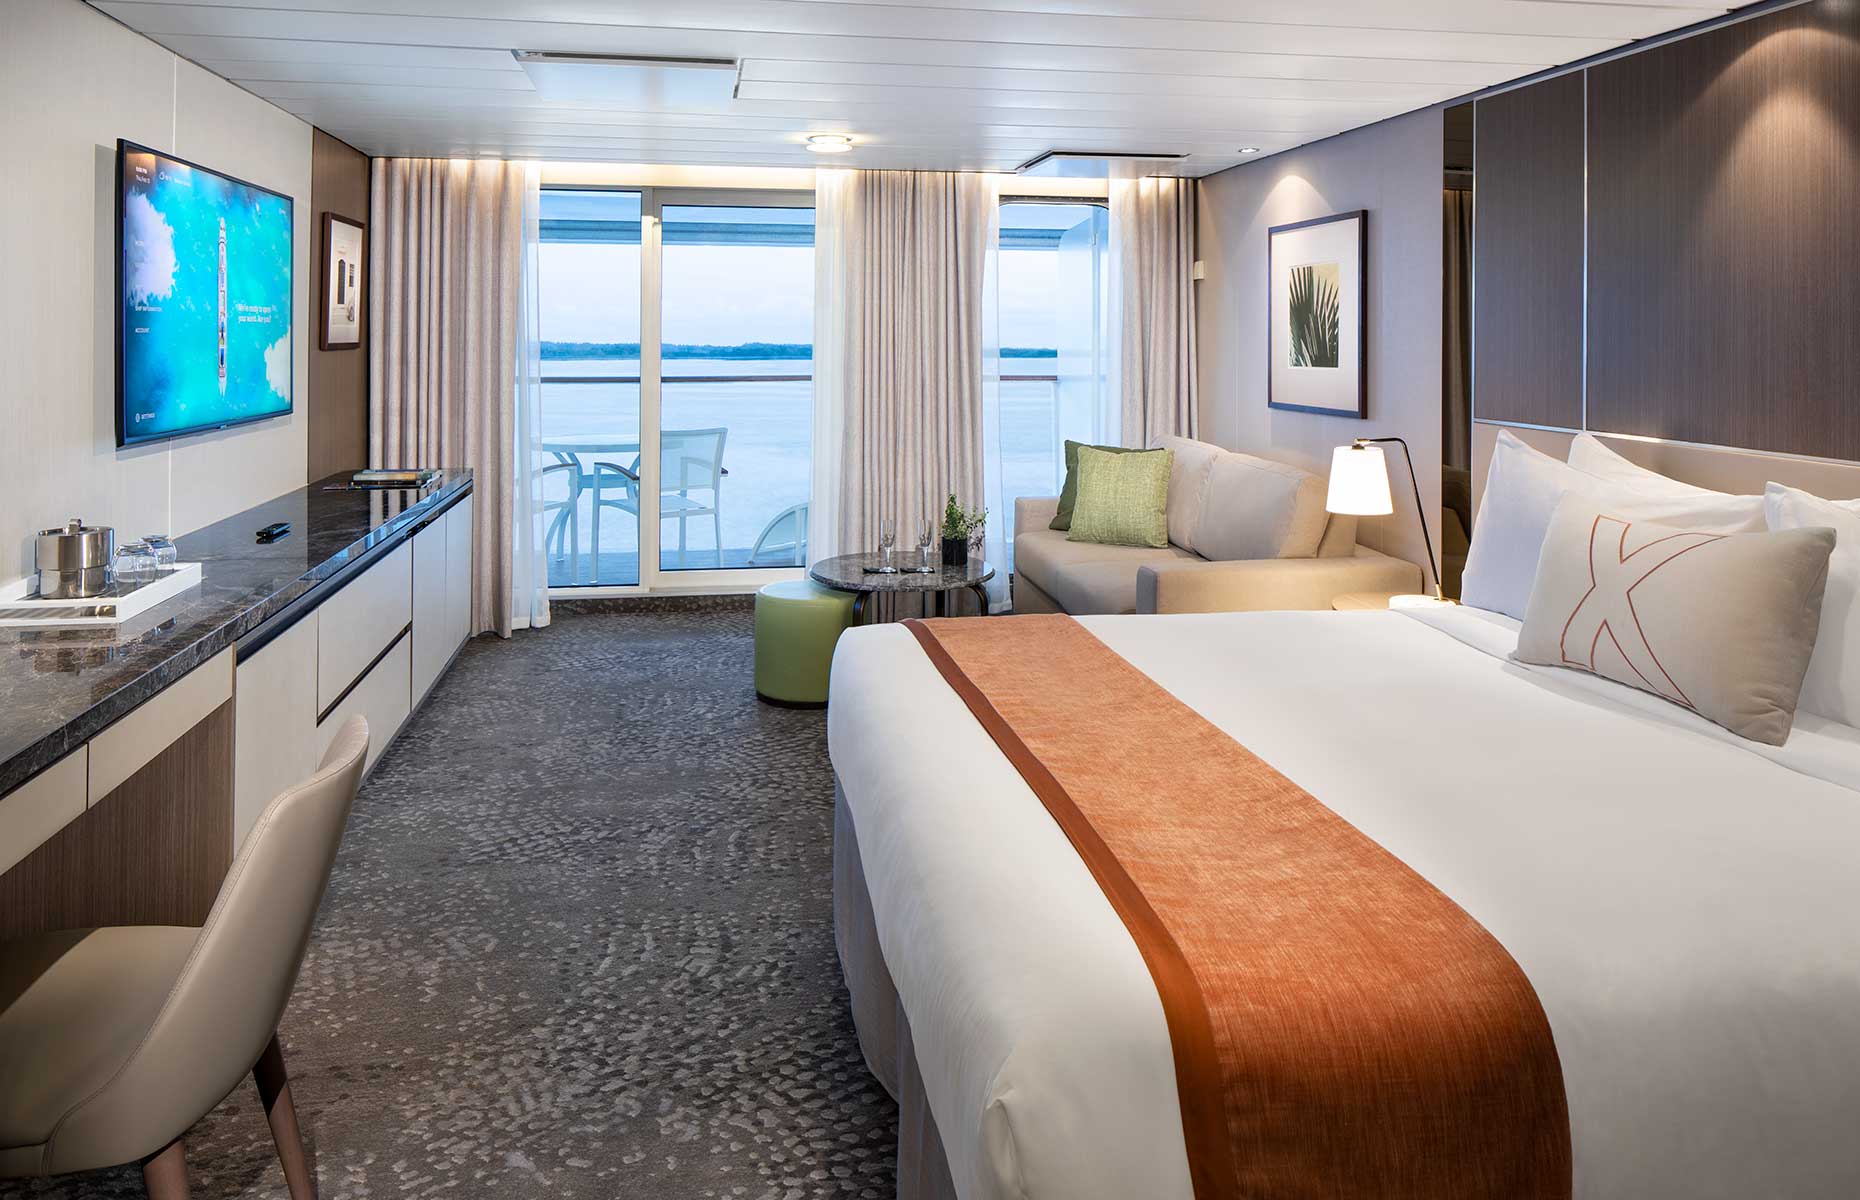 One of the suites onboard Celebrity Silhouette (Image: Courtesy of Celebrity Cruises)